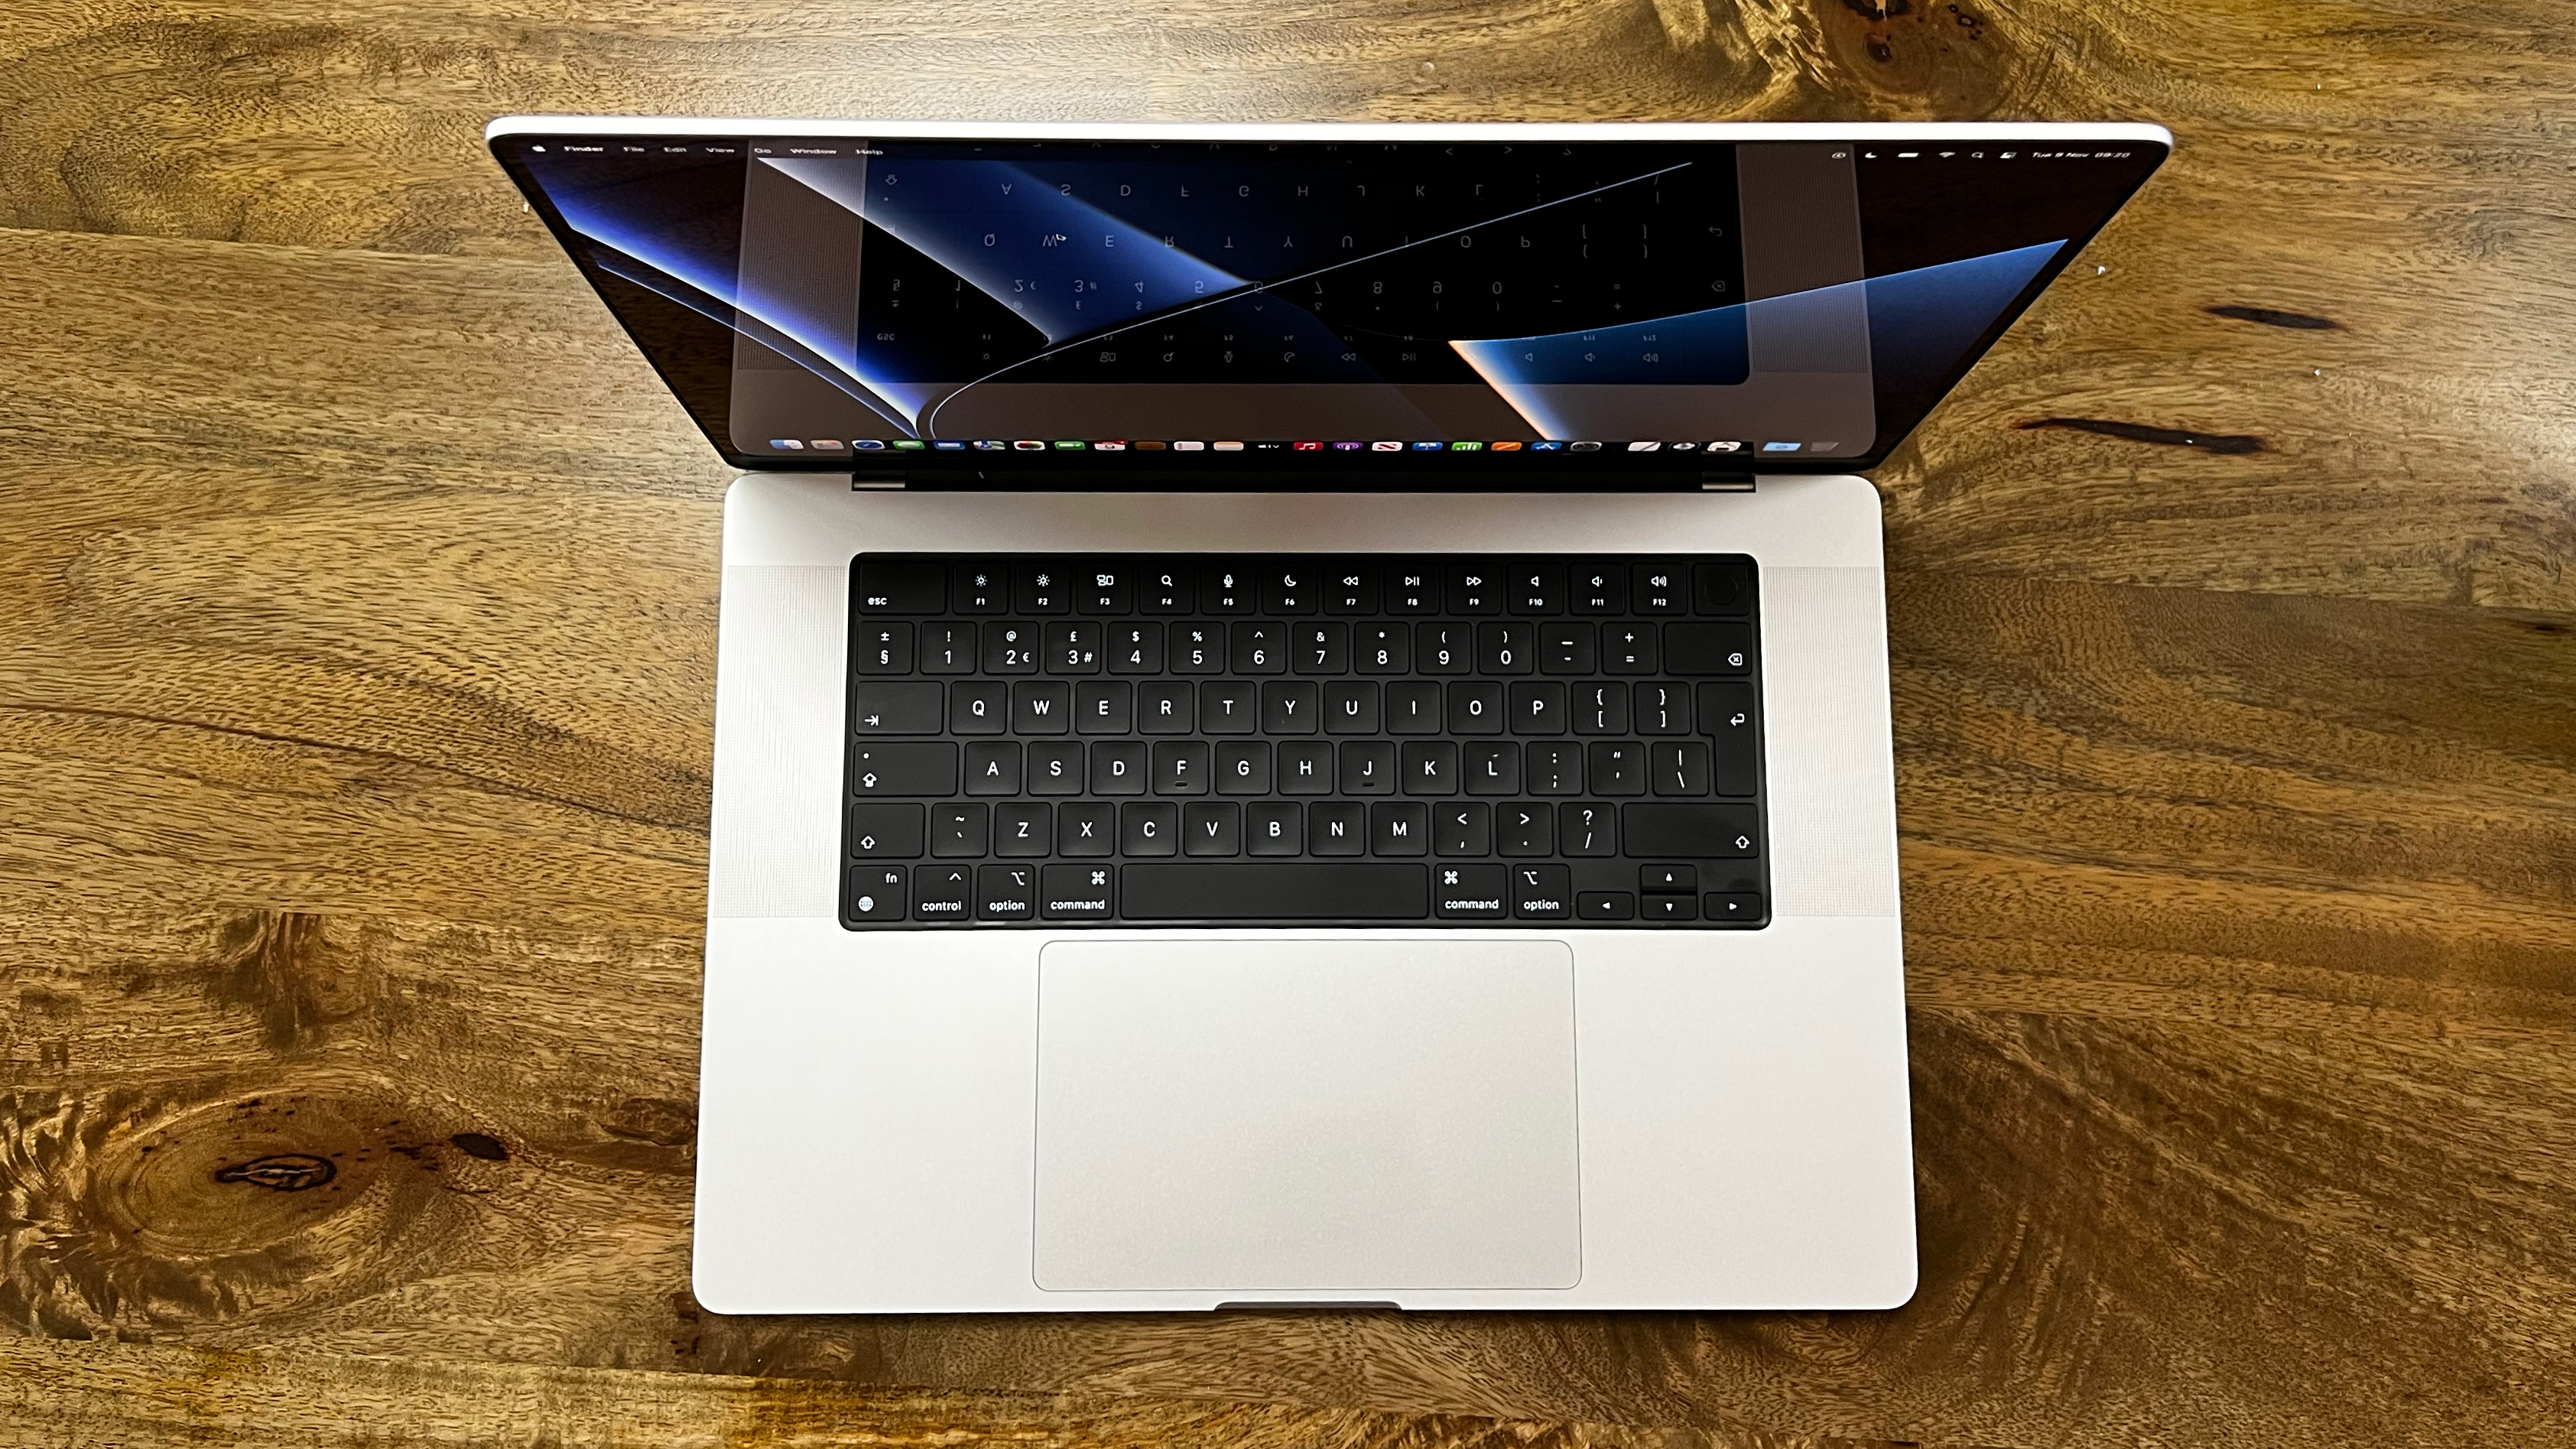 MacBook Pro 16-inch review